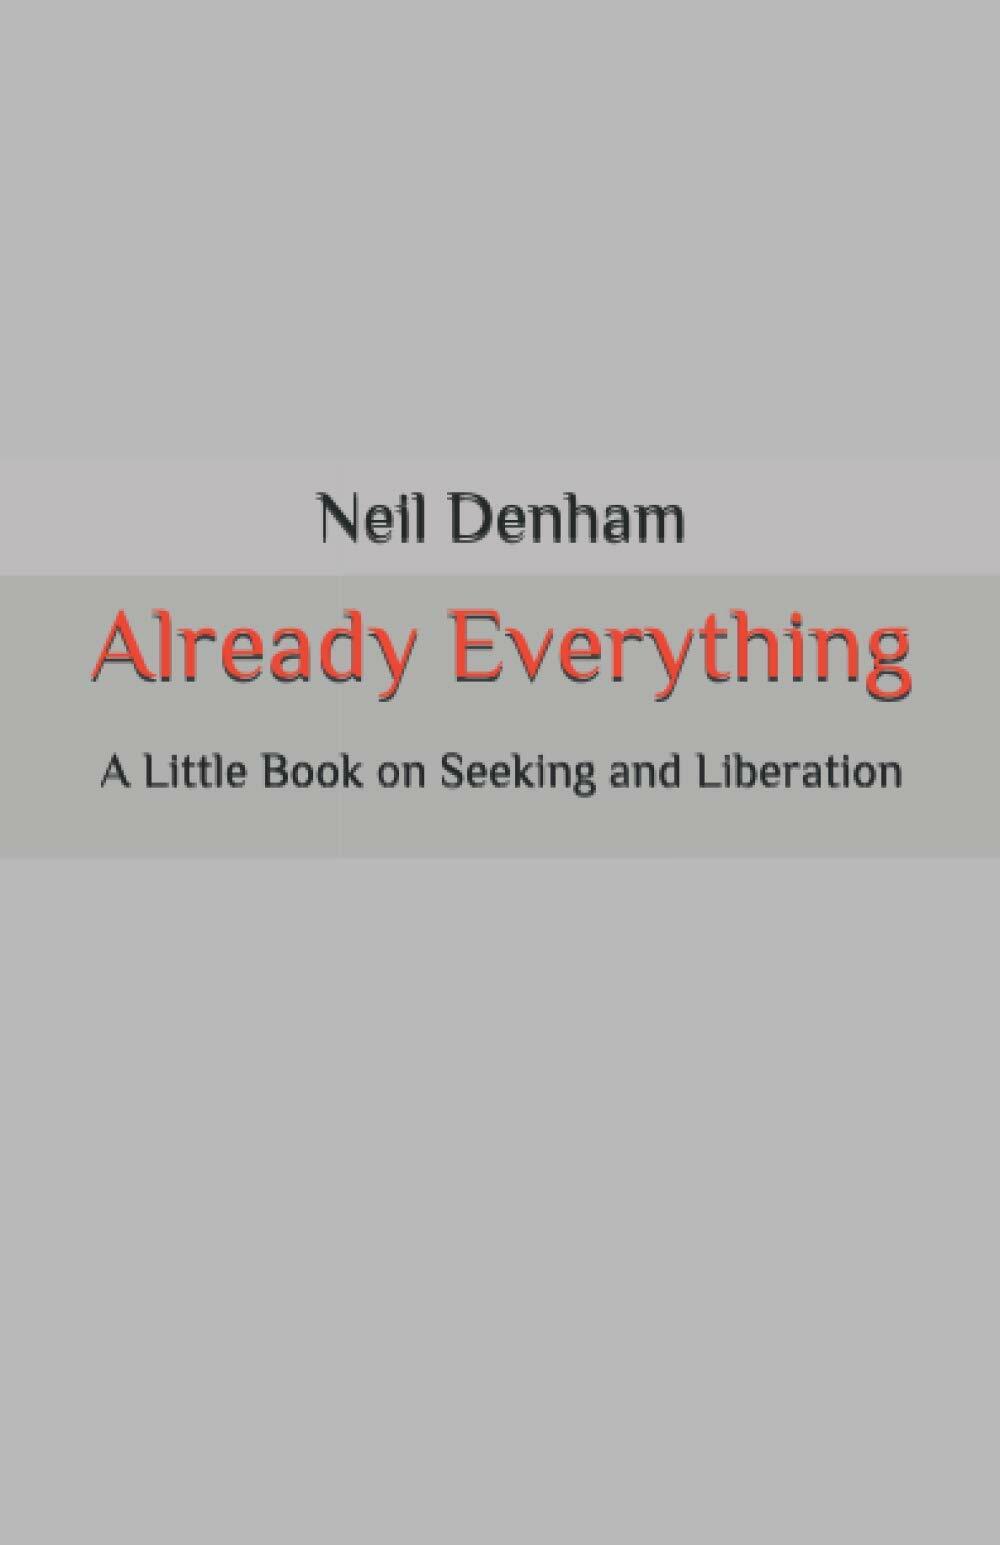 Already Everything: A Little Book on Seeking and Liberation (Paperback)